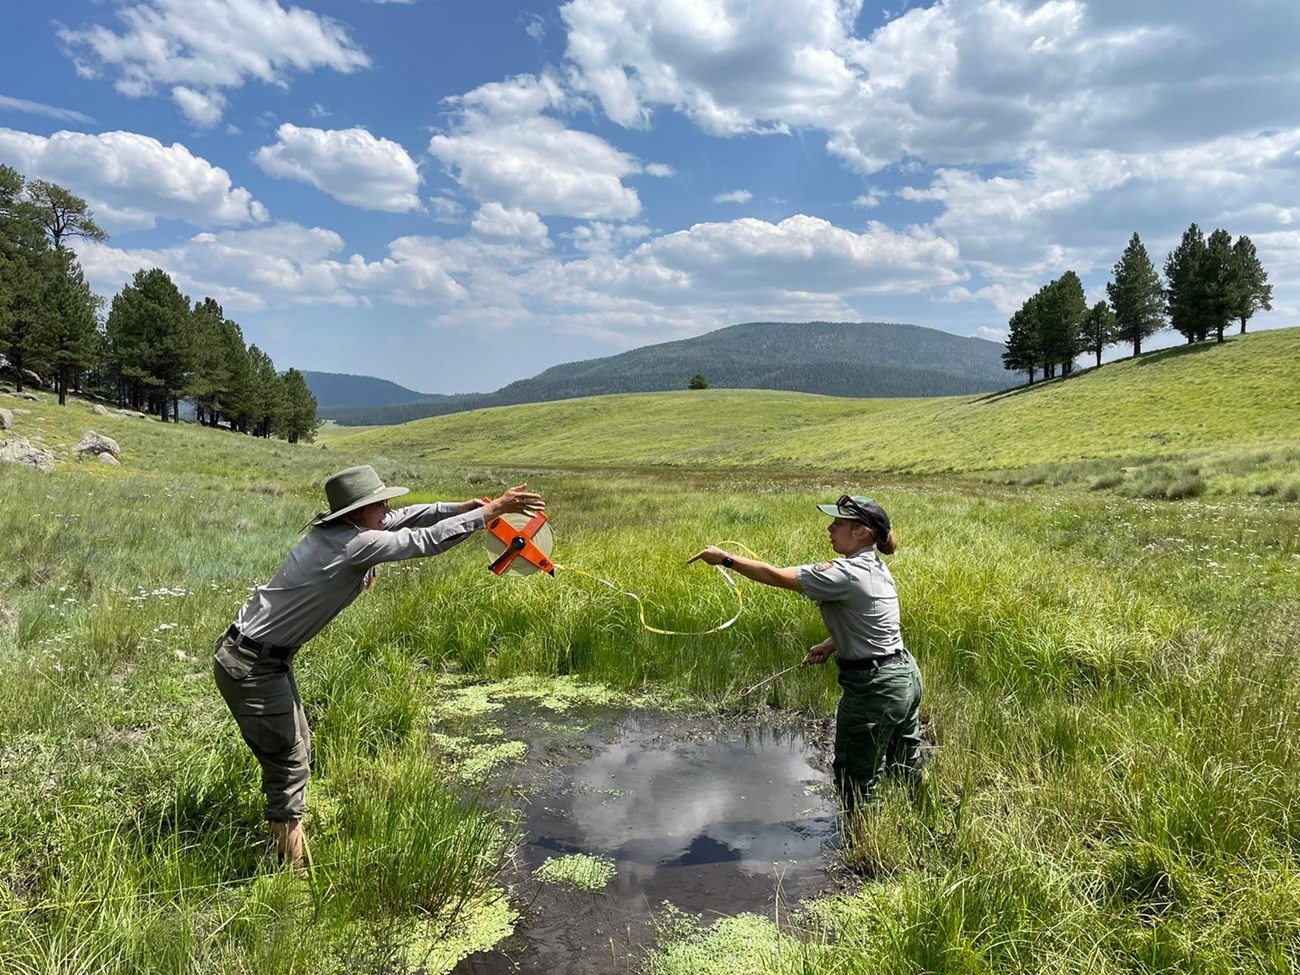 Two researchers measure a narrow stream in a grassy valley.